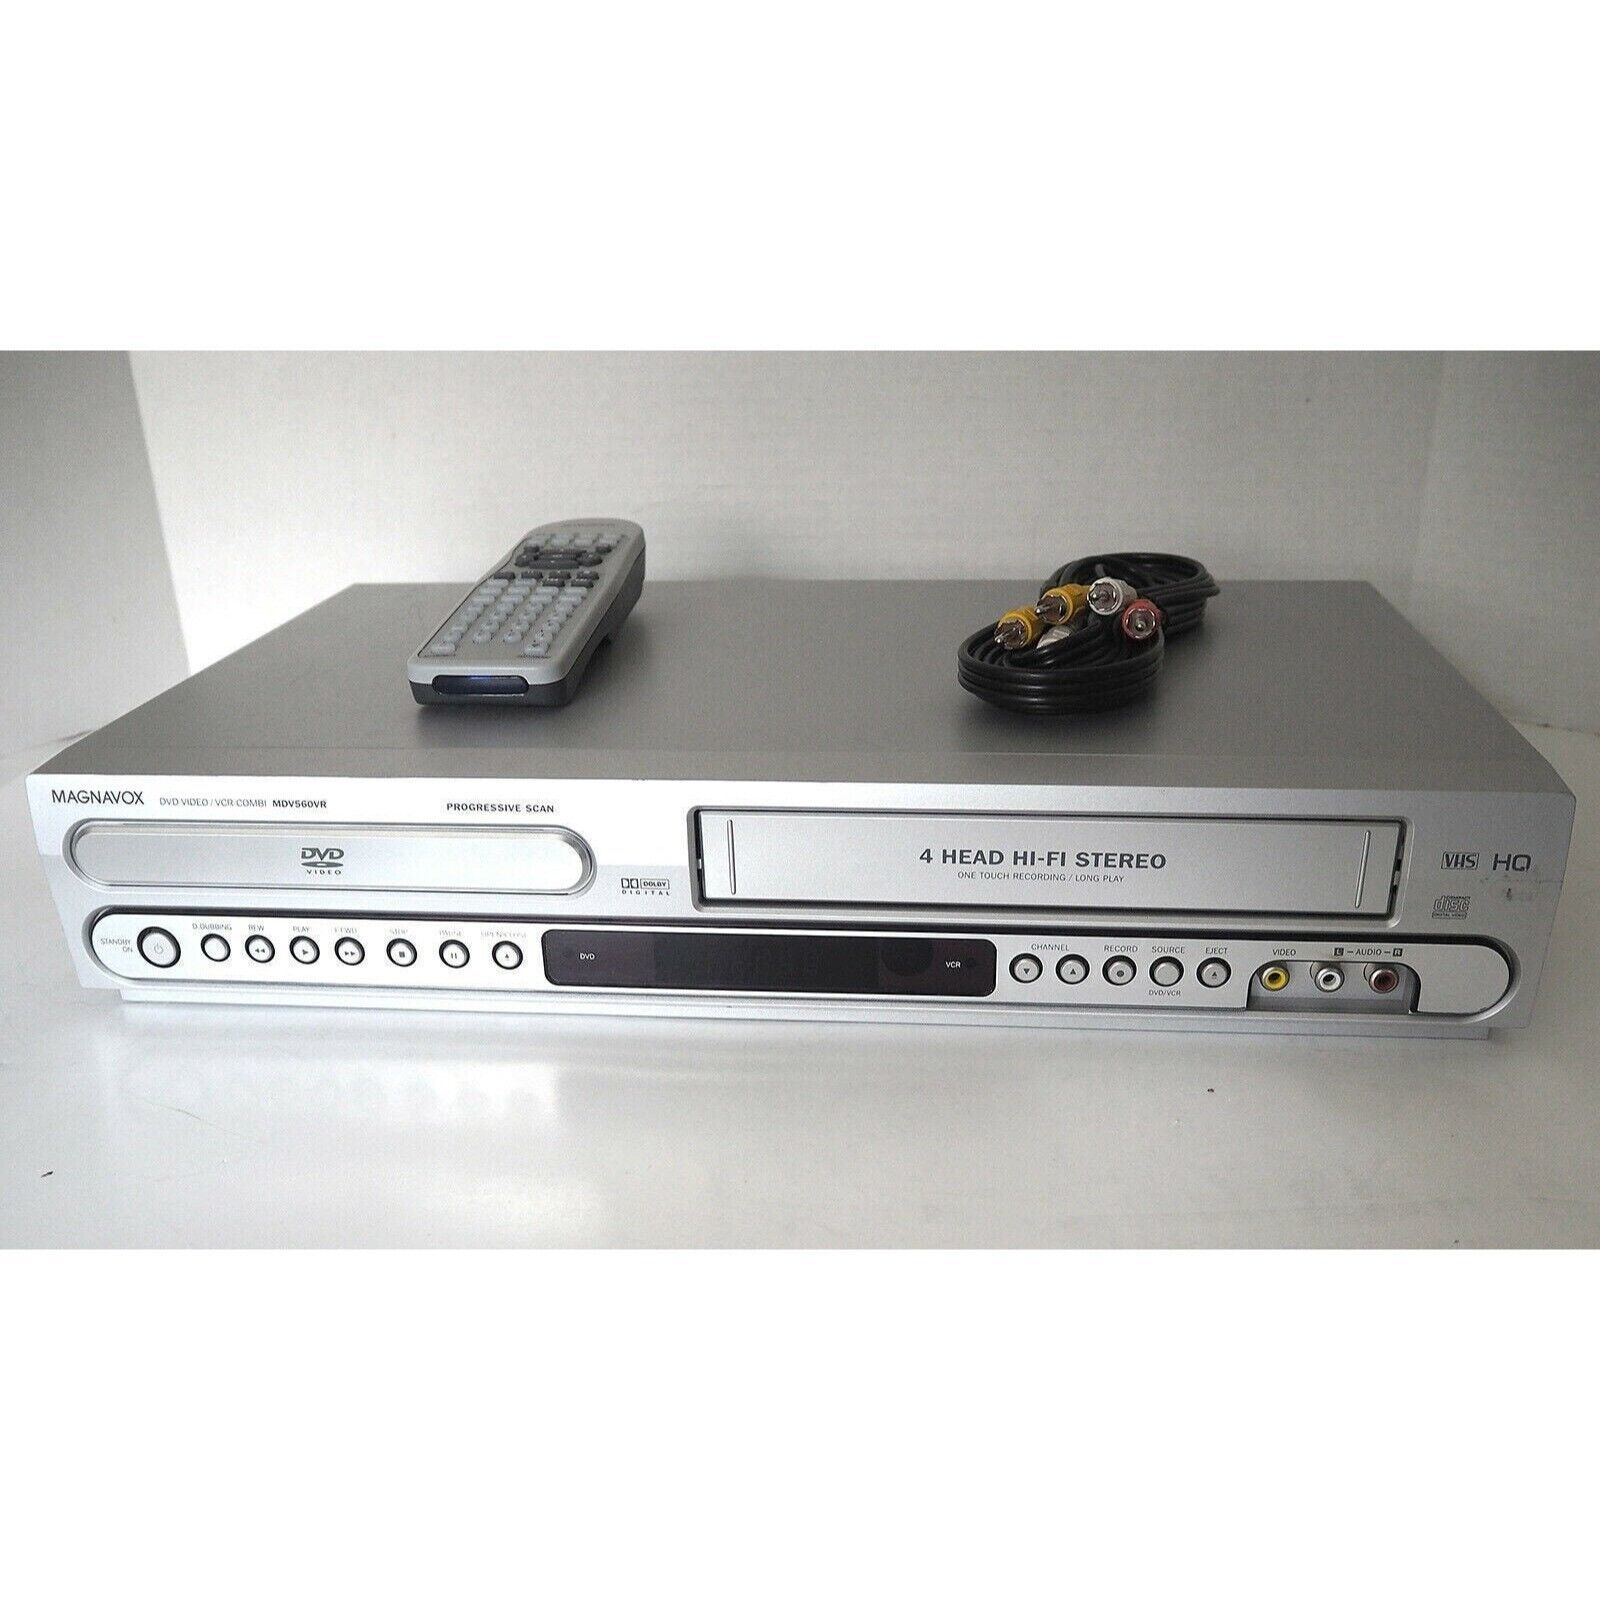 Magnavox mdv560vr DVD VCR Combo with Remote, Cables & Hdmi Adapter - $195.98